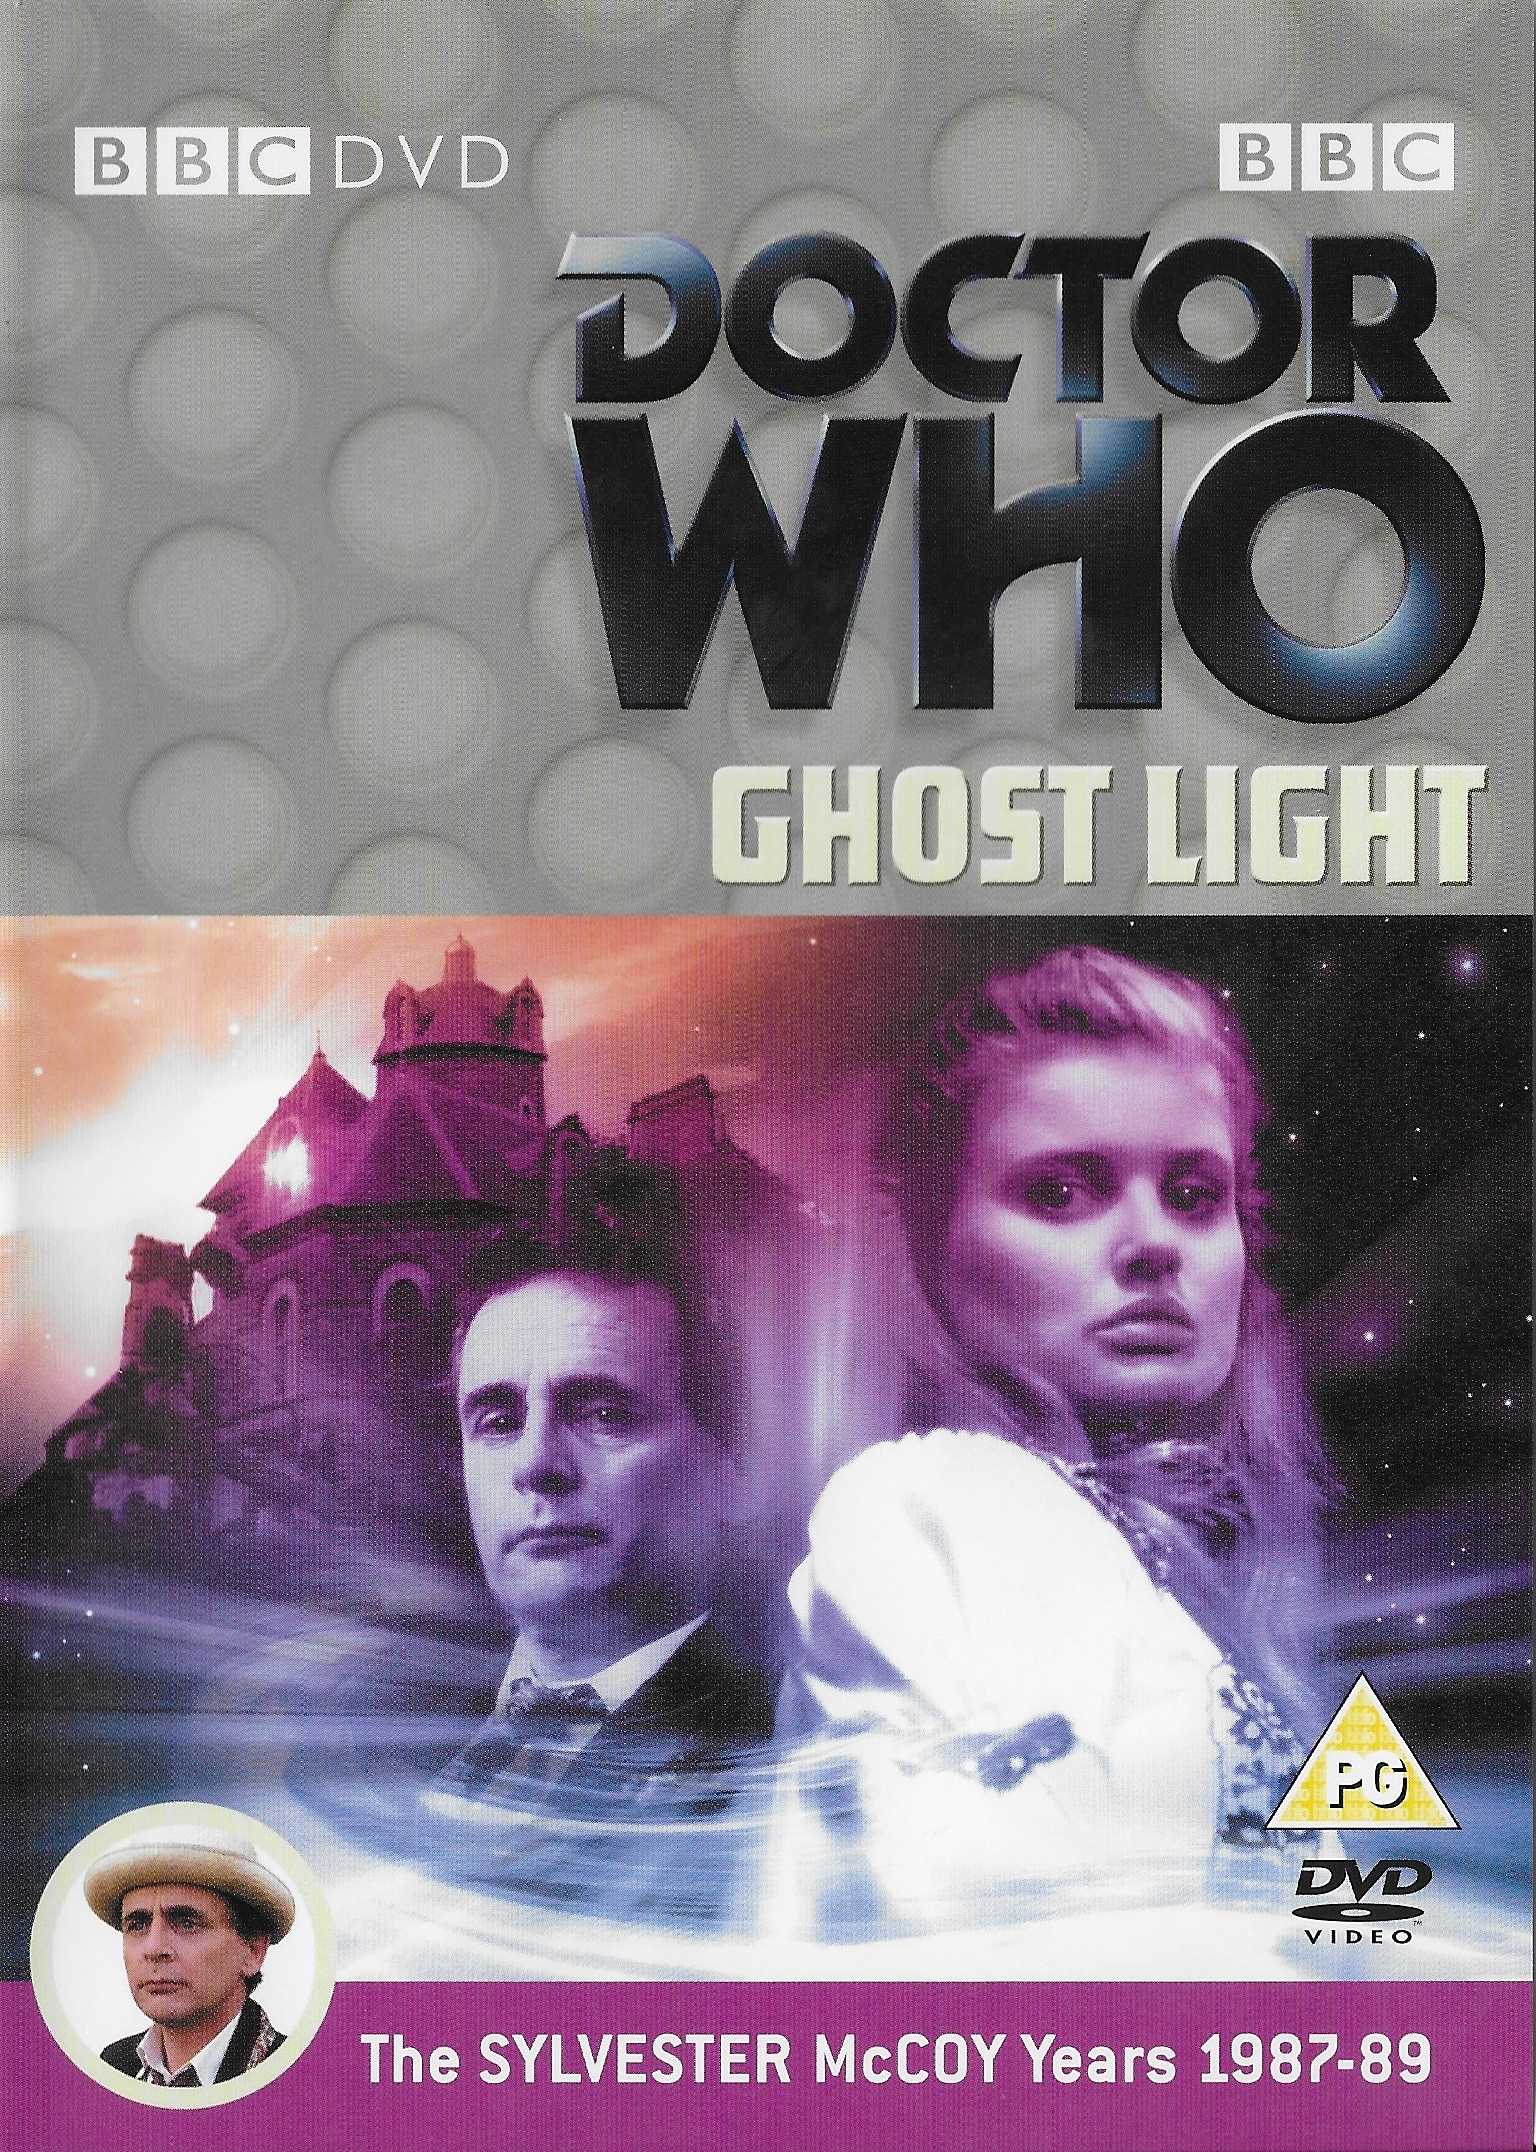 Picture of BBCDVD 1352 Doctor Who - Ghostlight by artist Marc Platt from the BBC dvds - Records and Tapes library